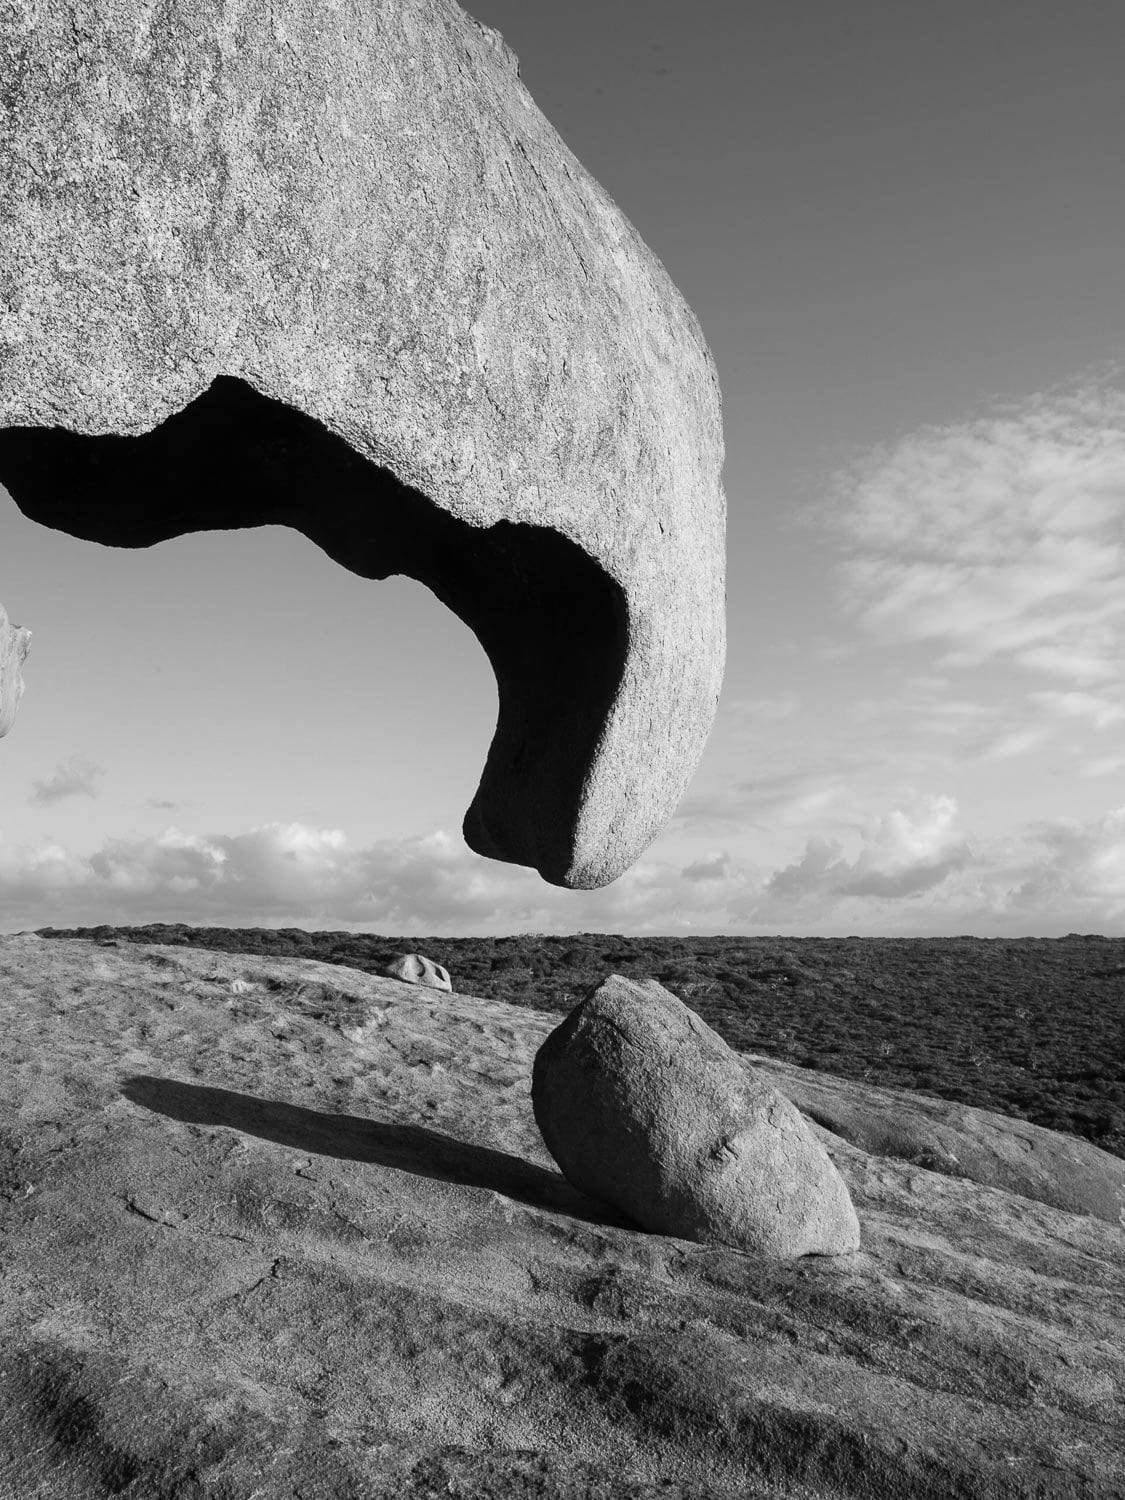 A large edge of a rock floating in the air, Remarkable Rocks #7 - Kangaroo Island SA